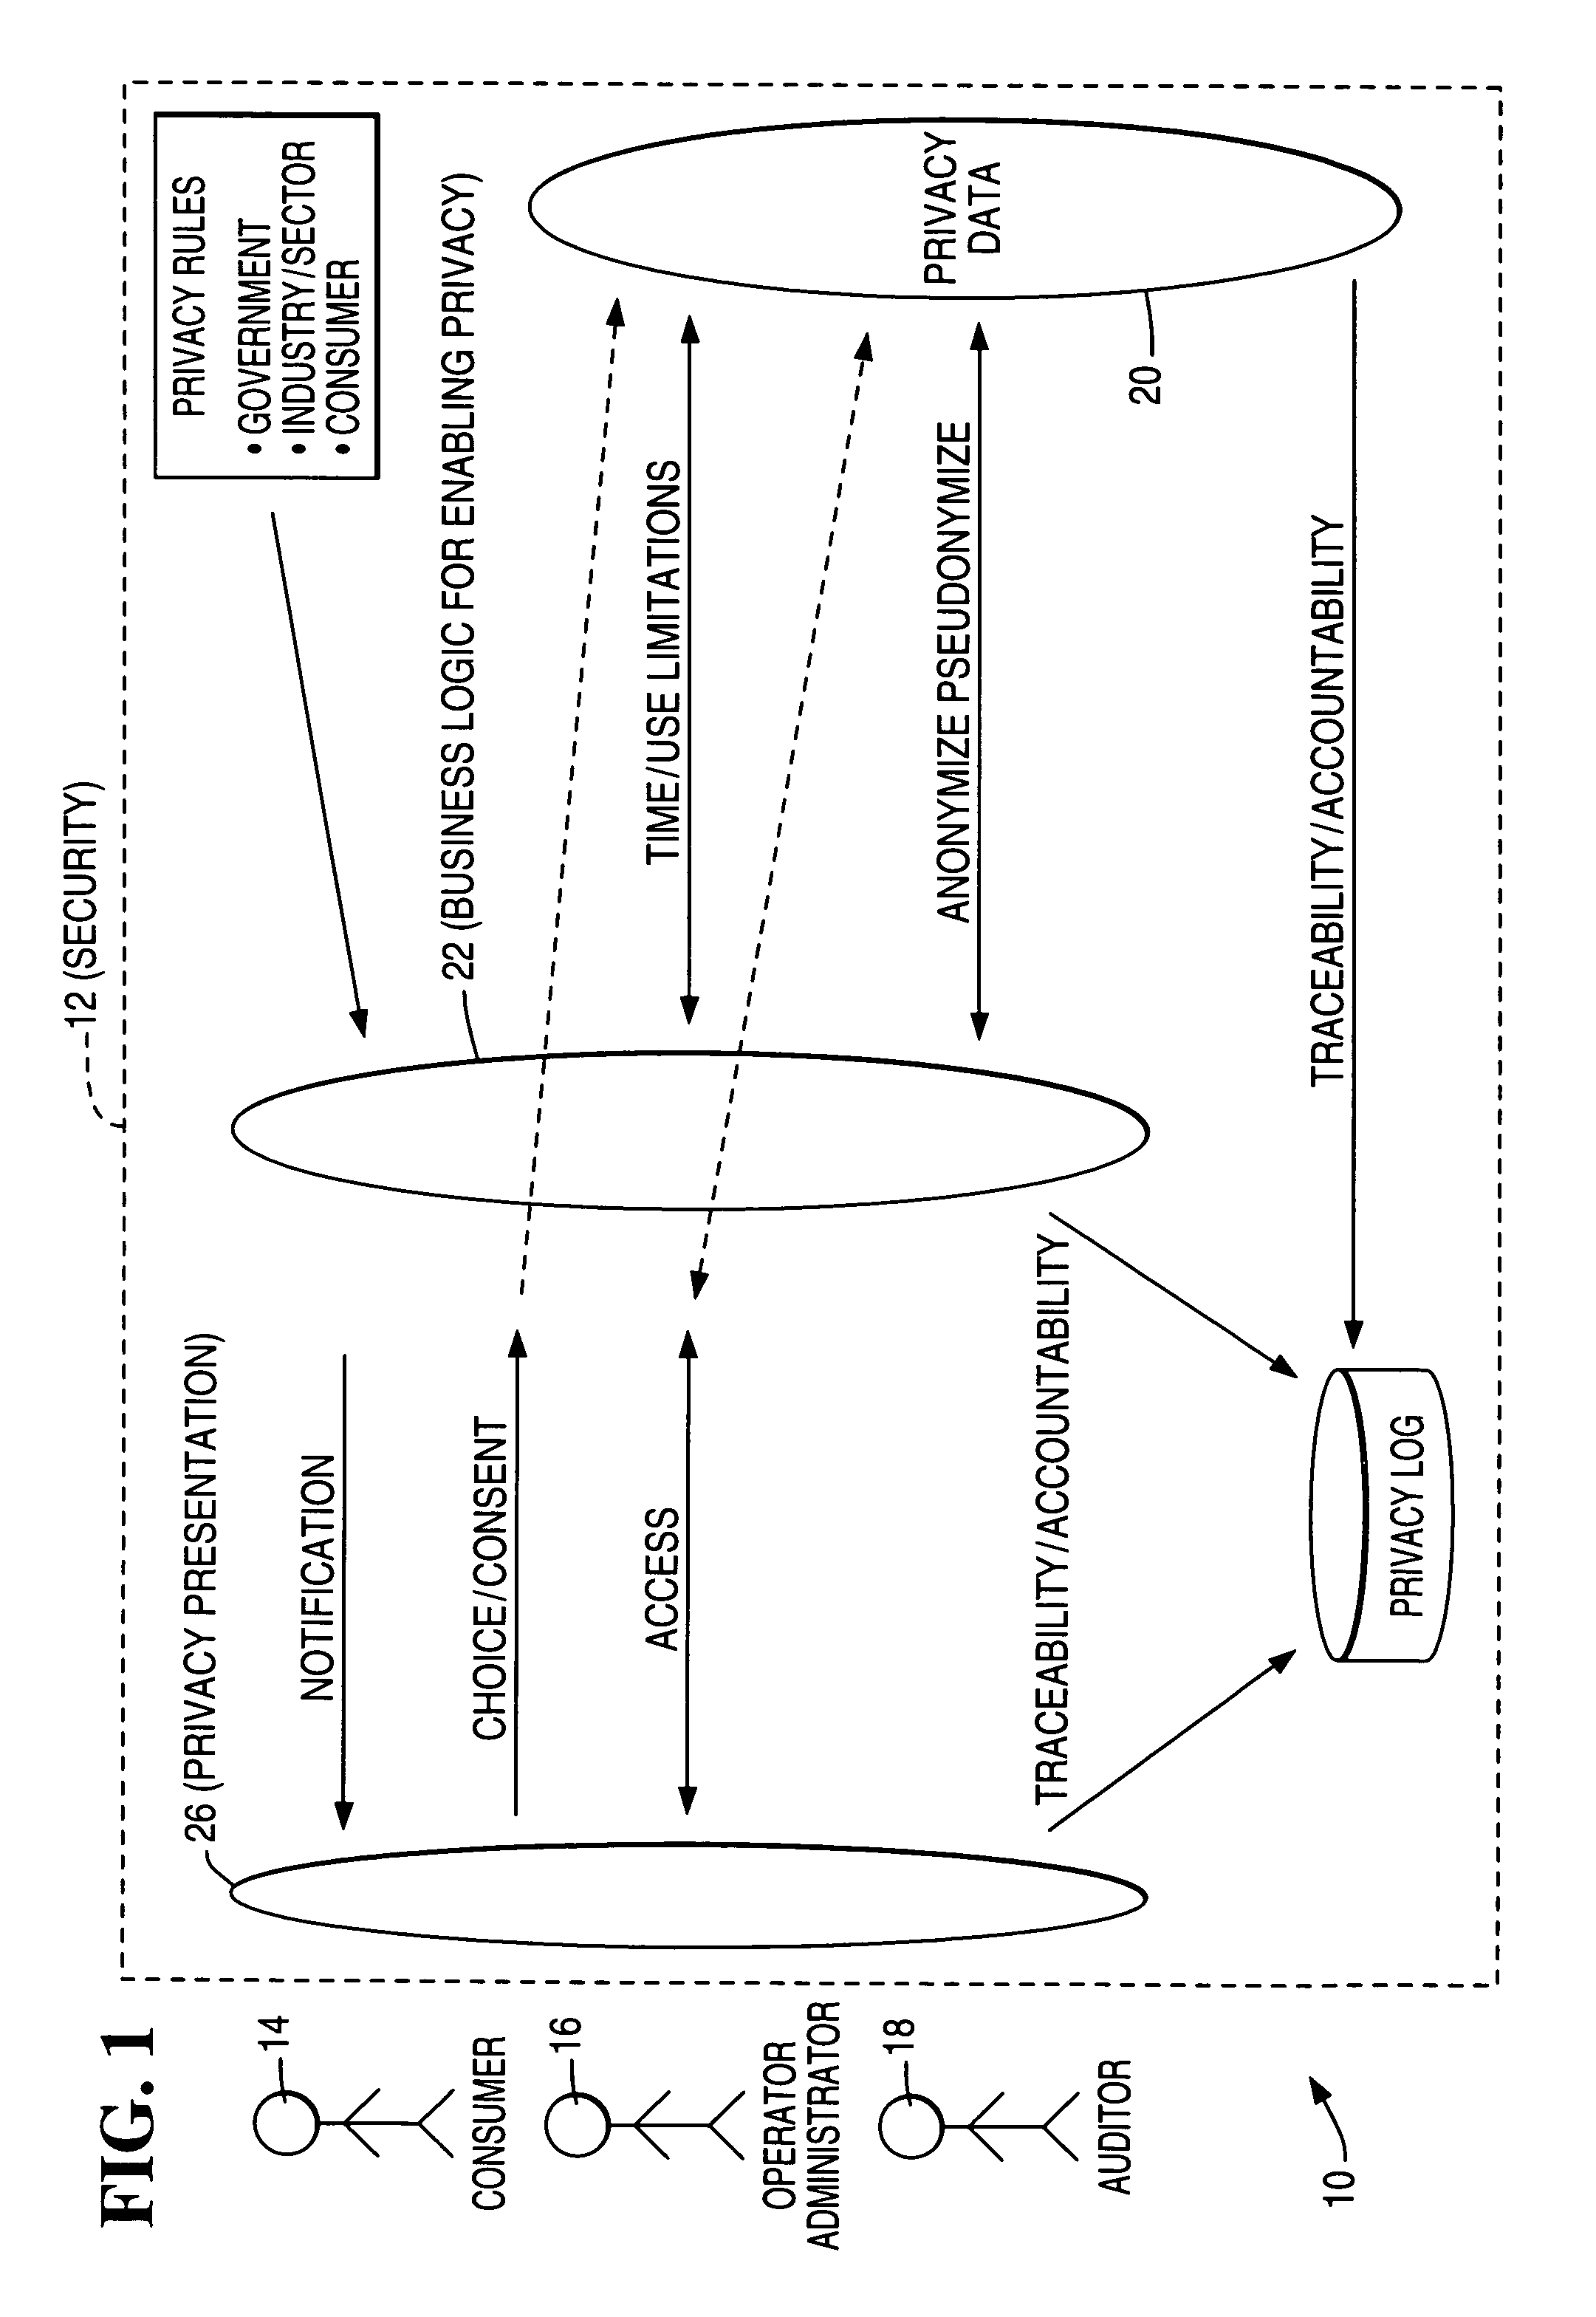 Architecture and method for operational privacy in business services